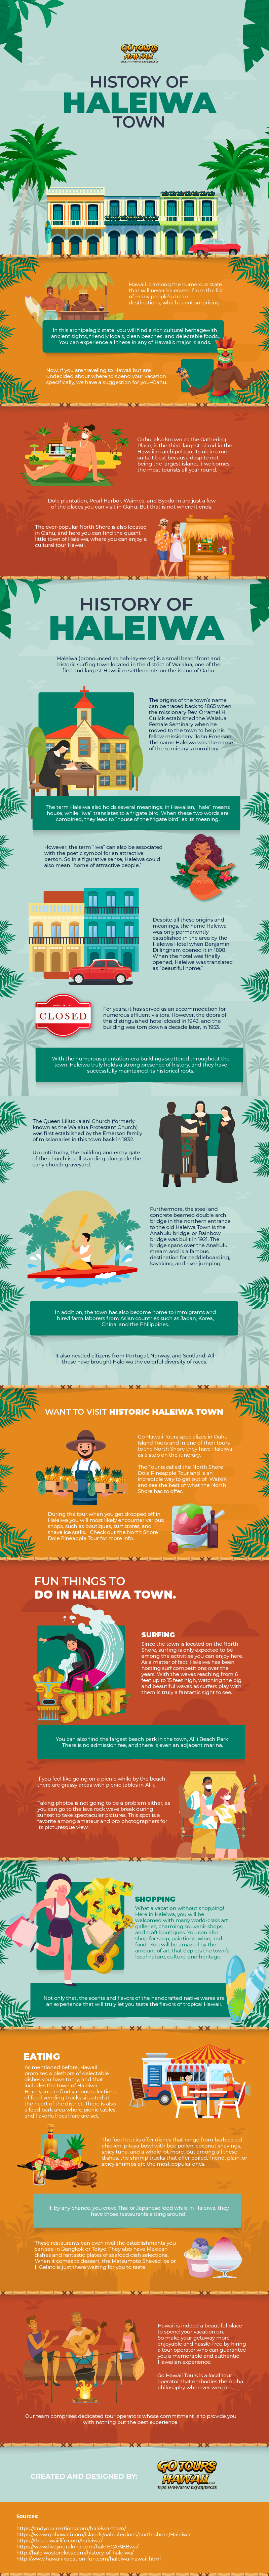 History of Haleiwa Town - Infographic Imageadw